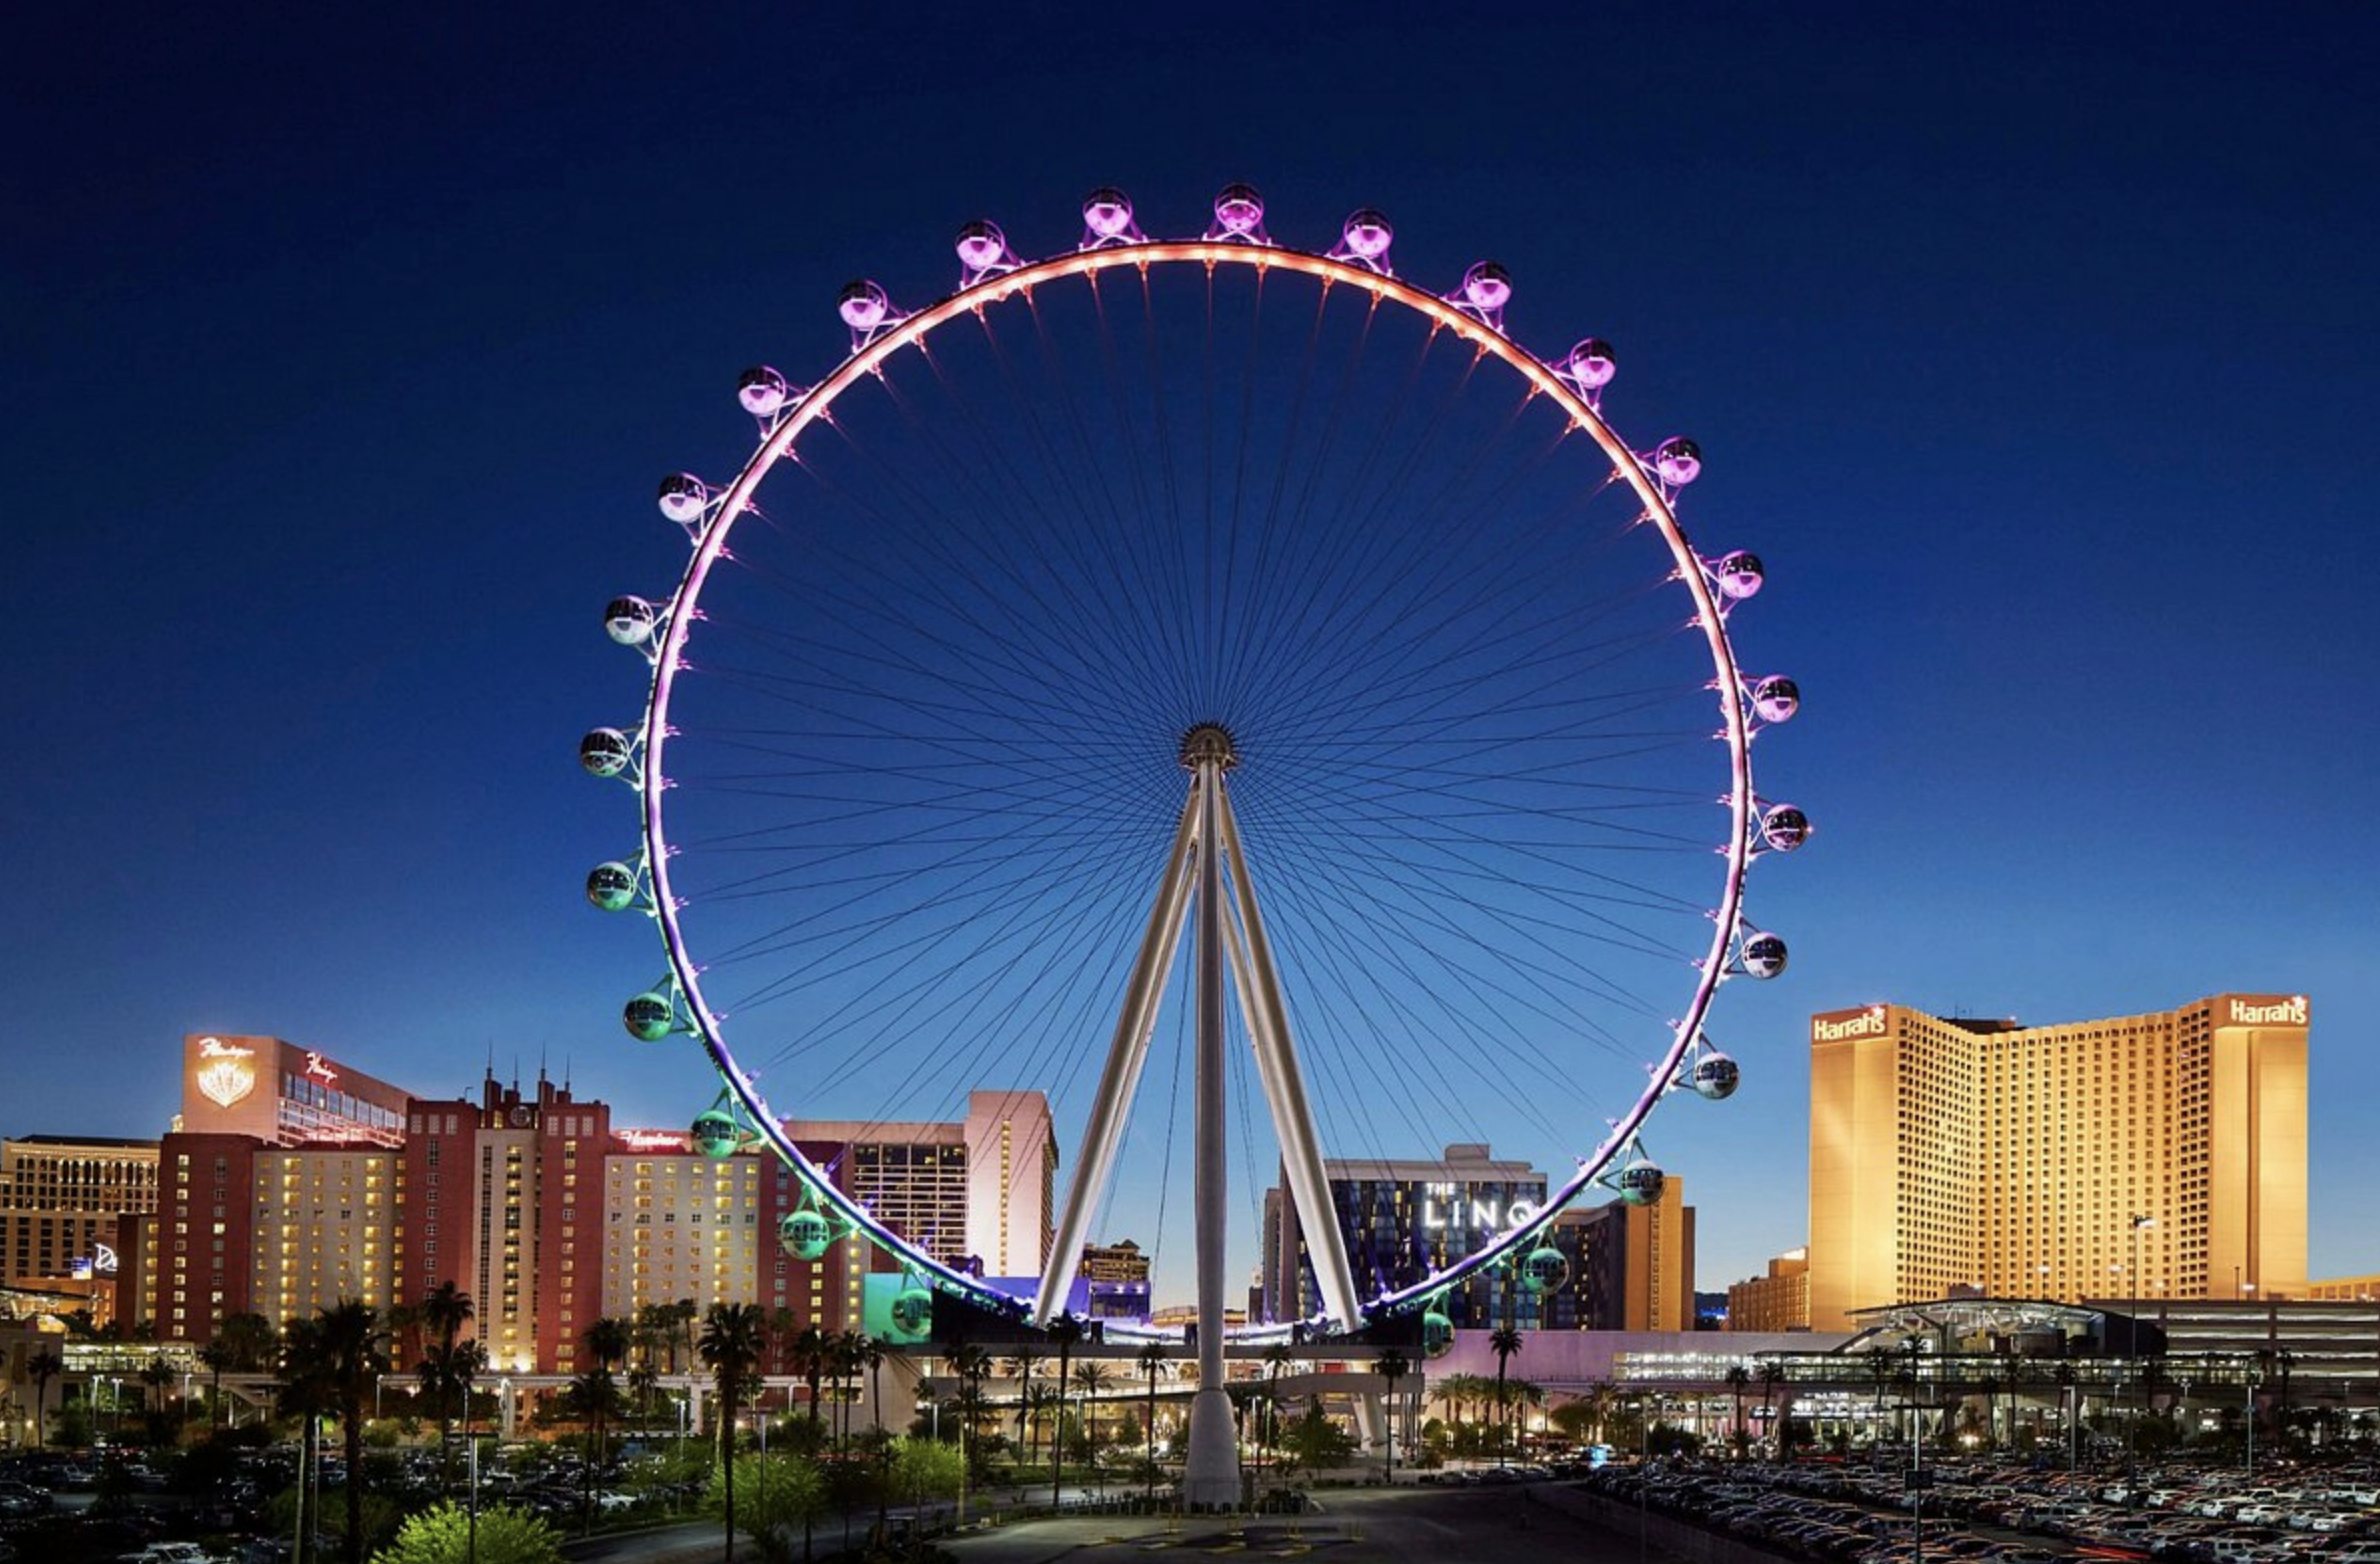 Enjoy the view from the High Roller Ferris wheel